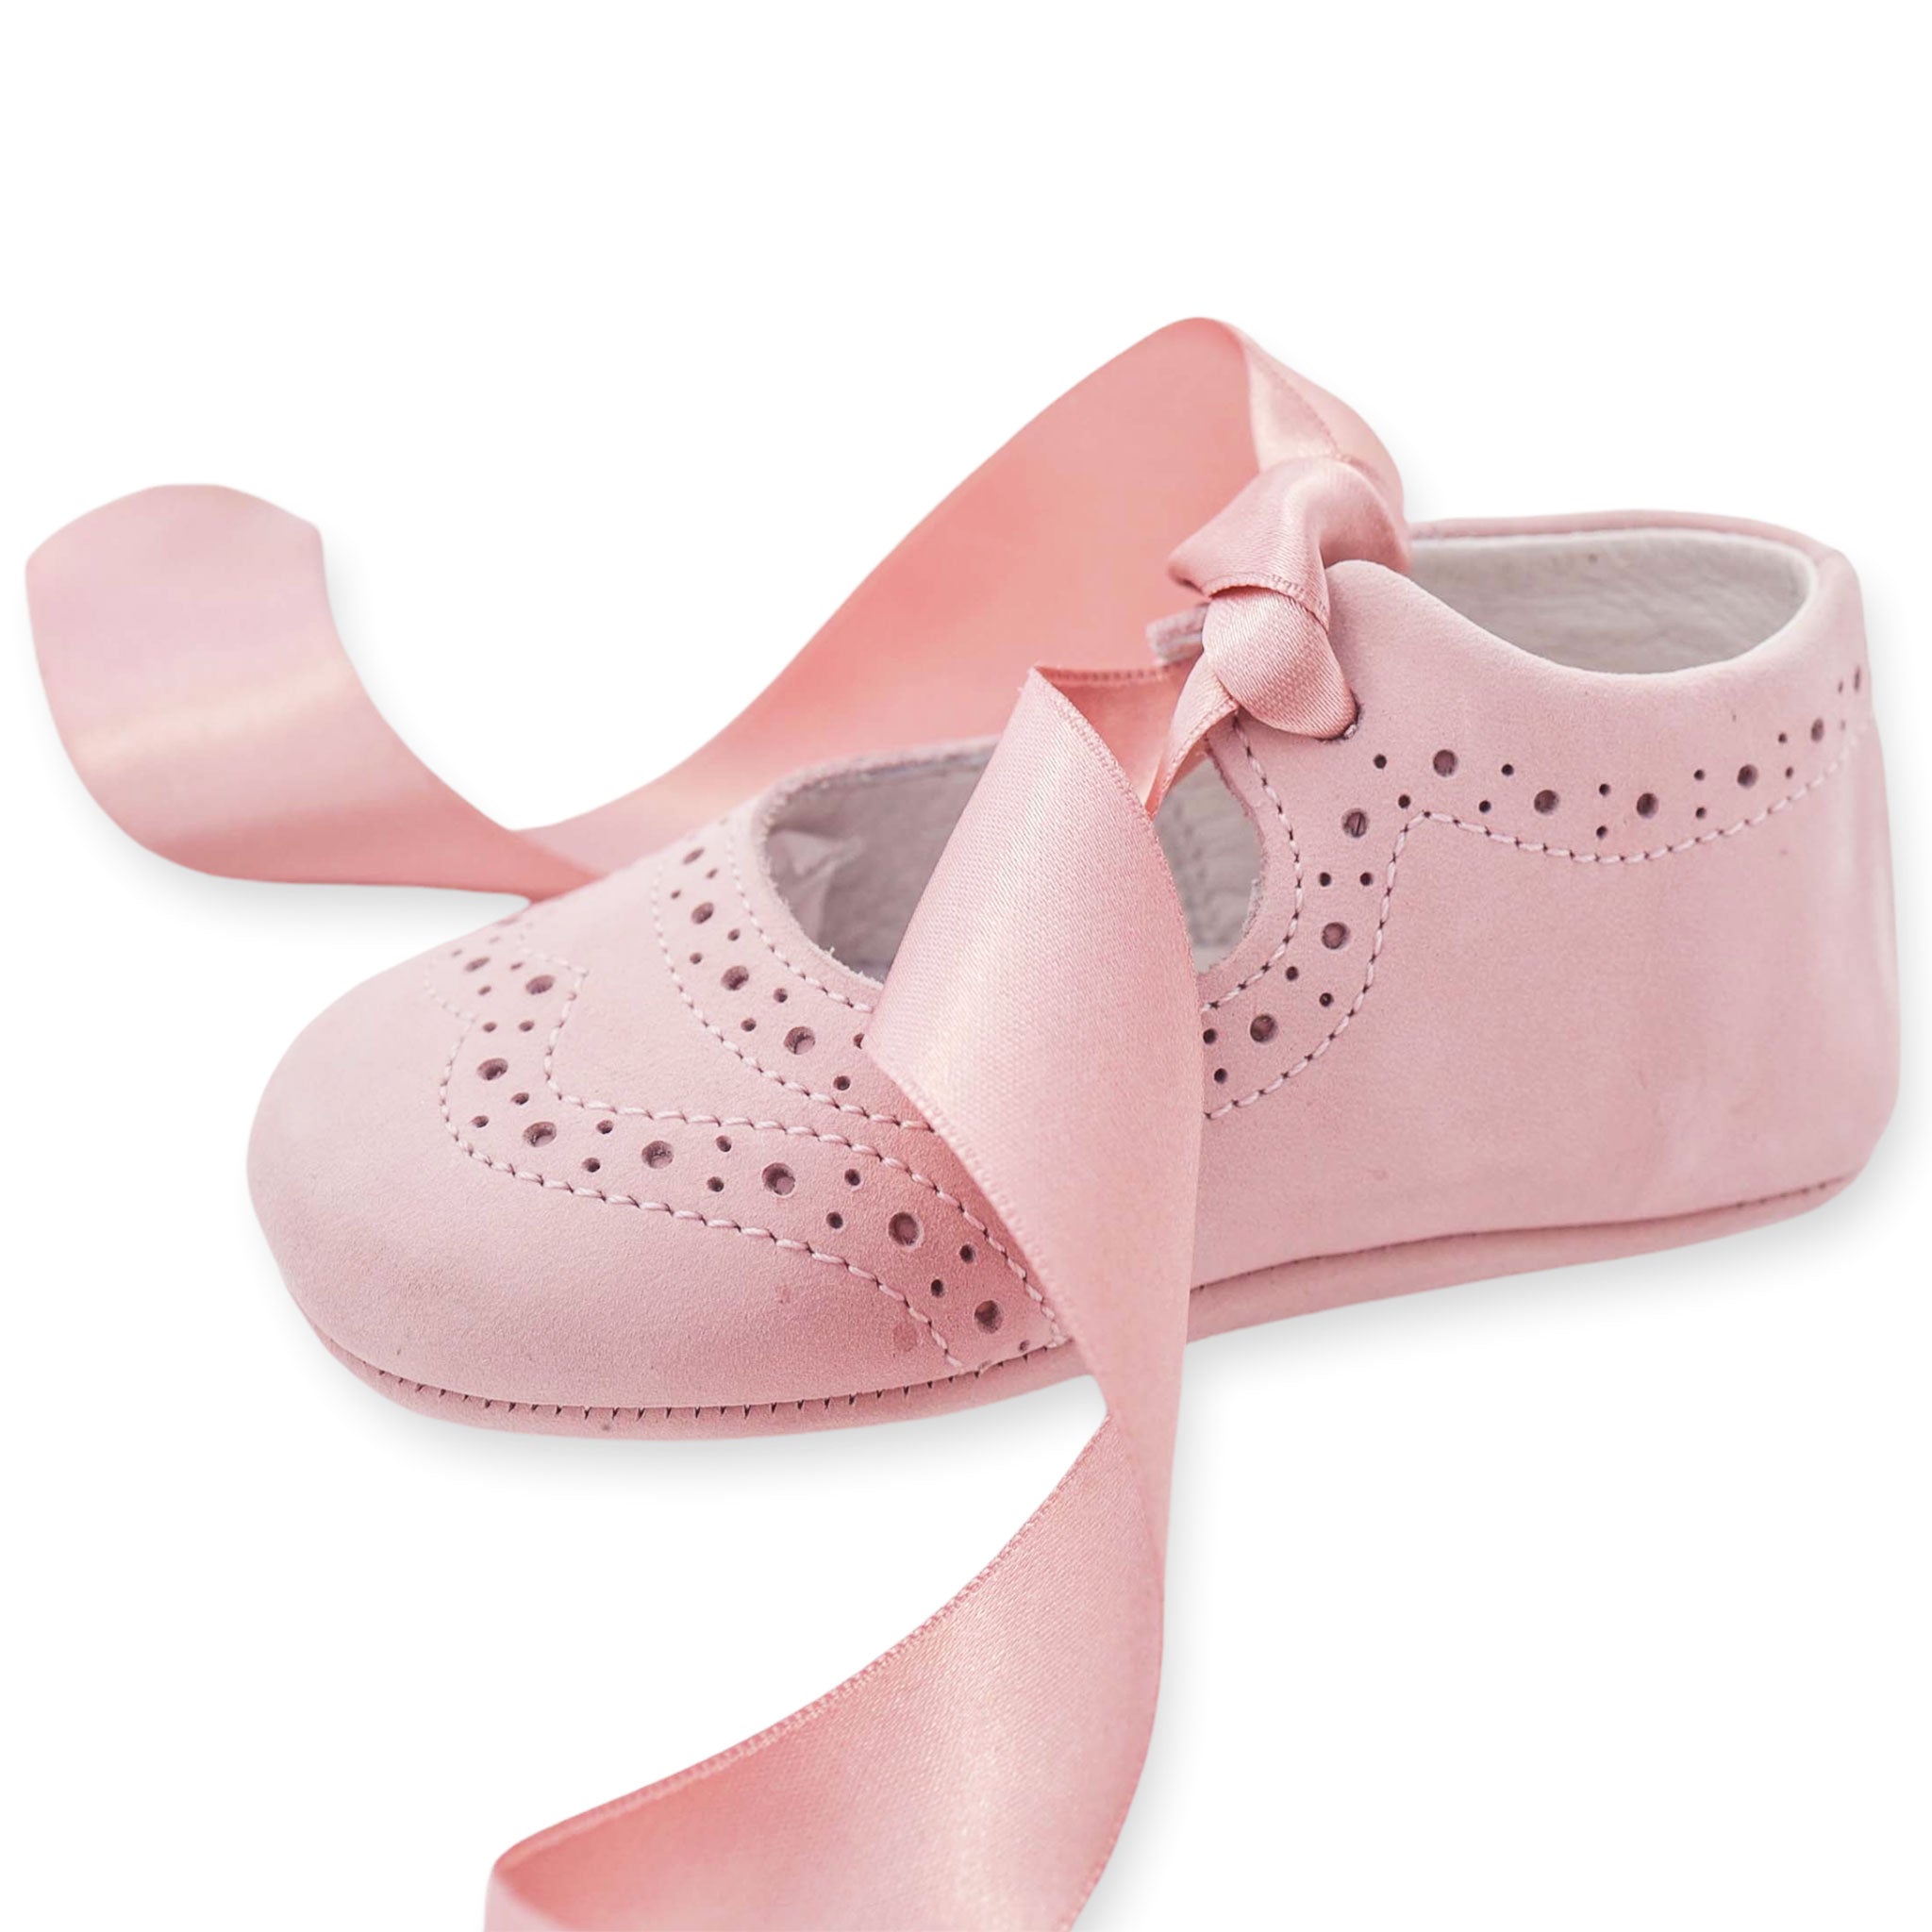 nubuck leather baby girl shoes pink side